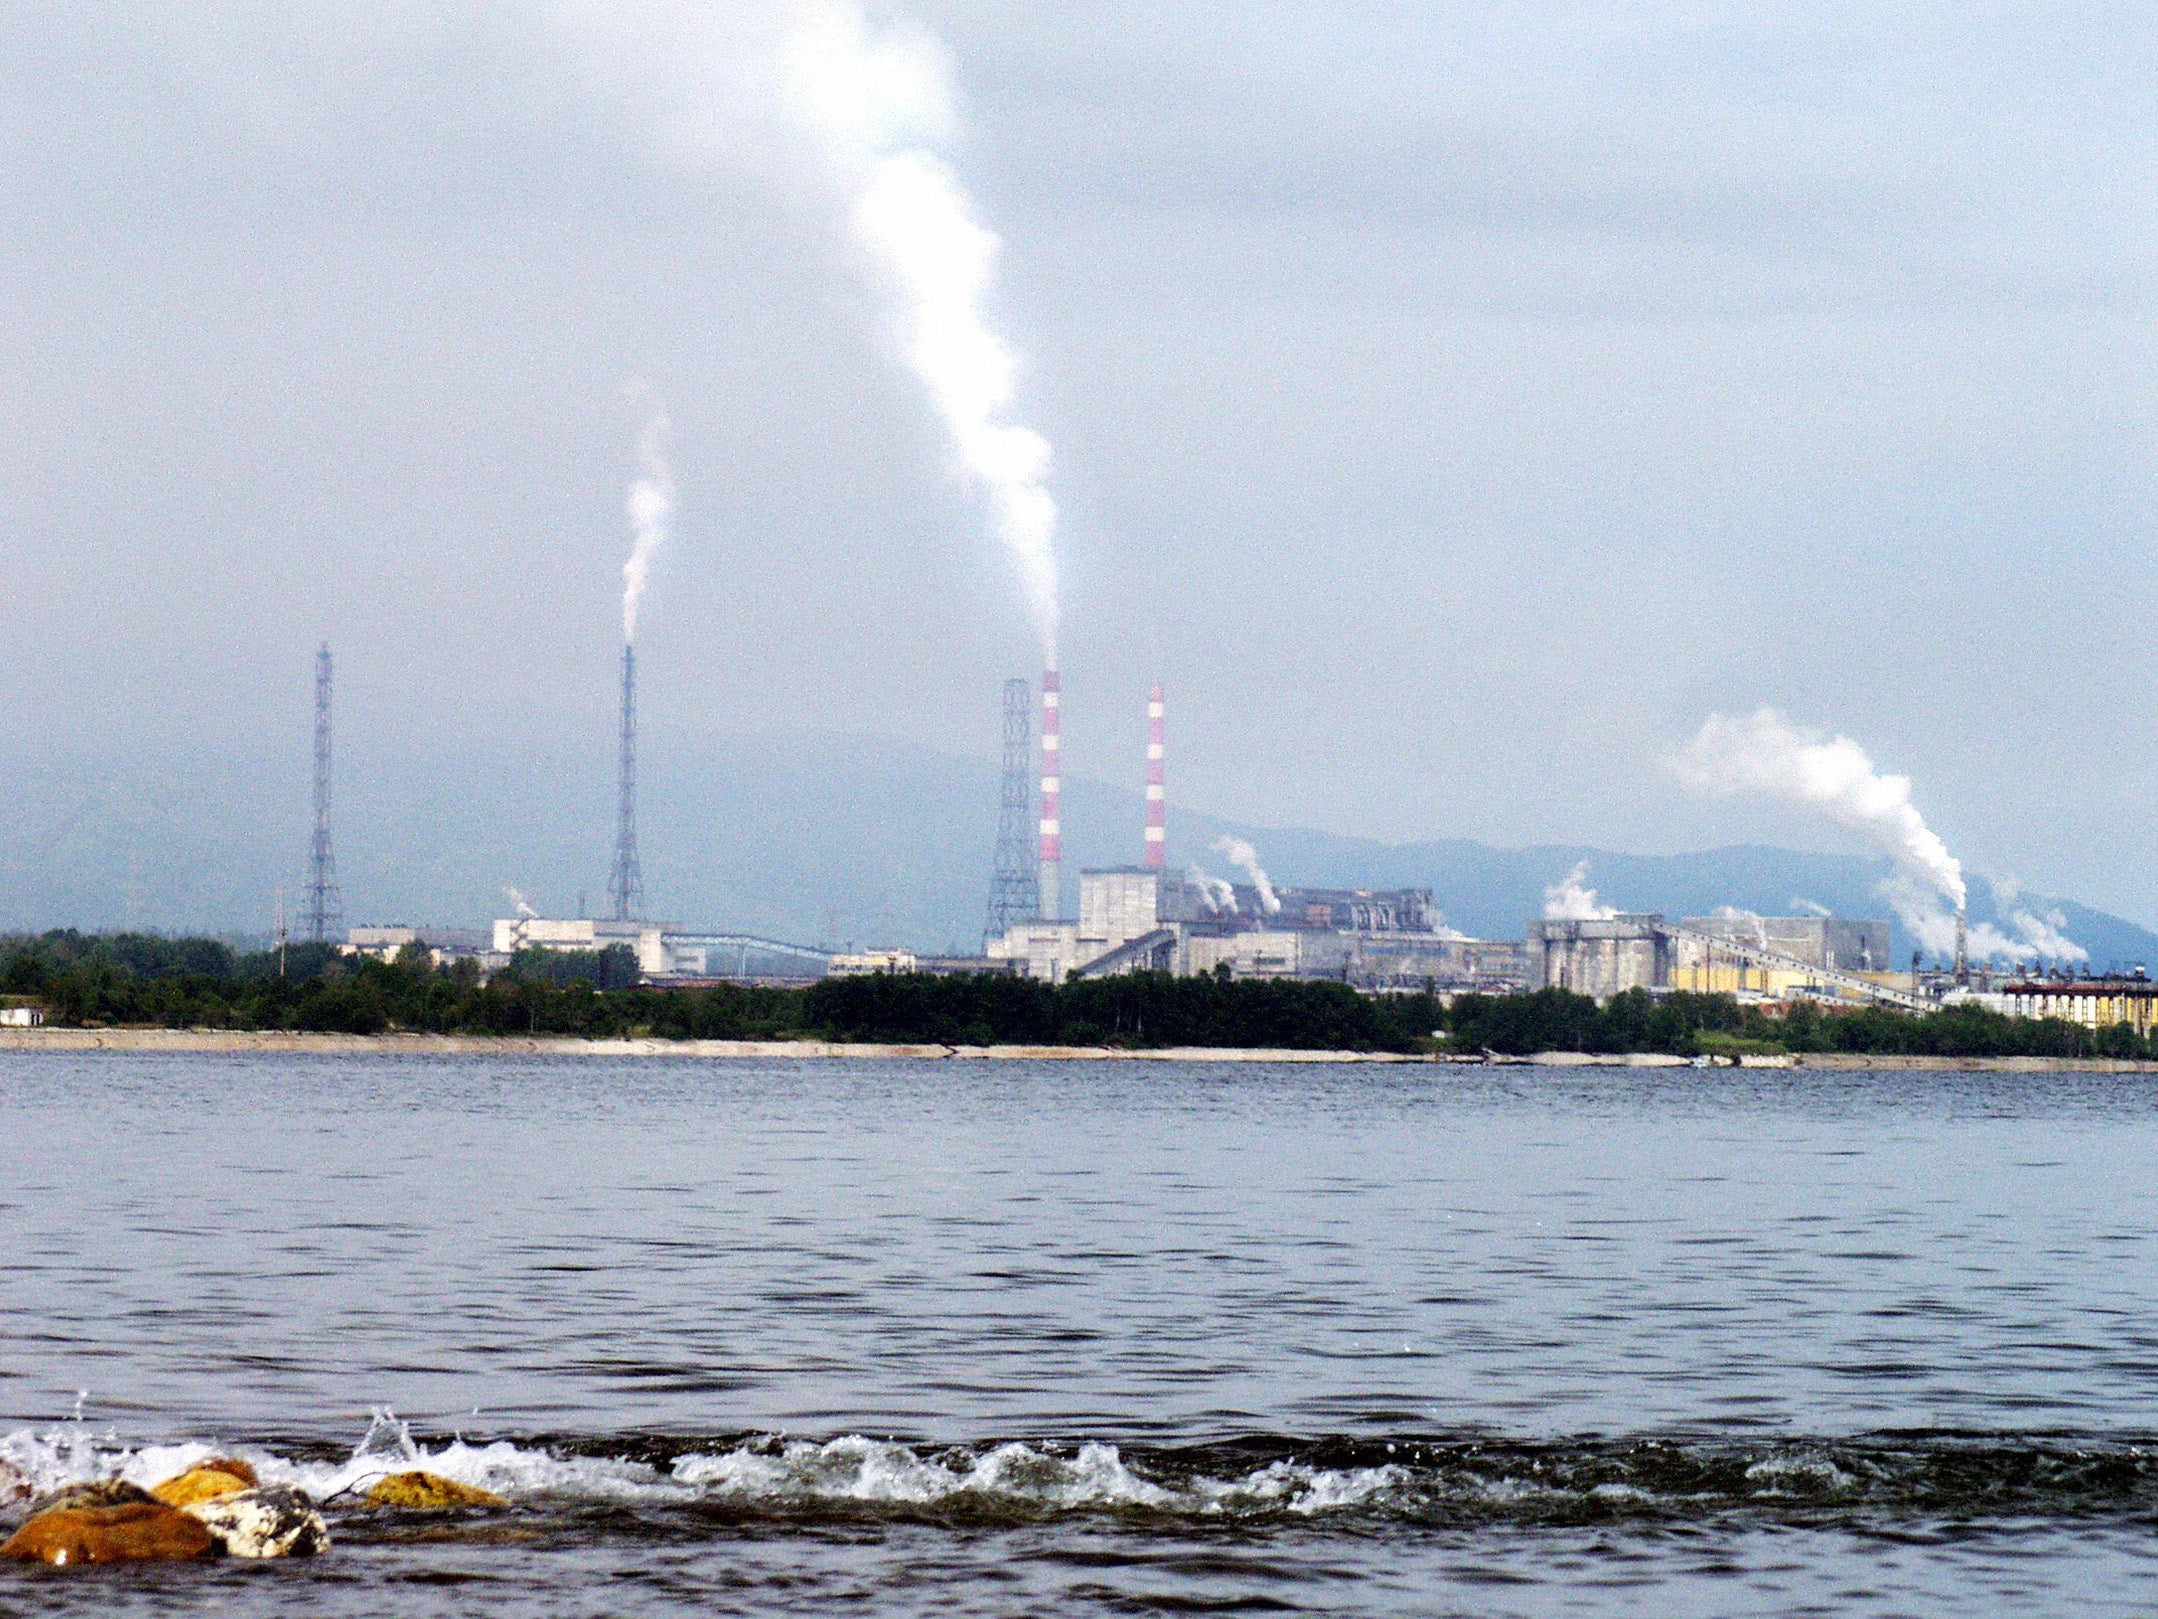 The Baykalsk cellulose plant near in Siberia was closed in 2013 because of its pollution of a nearby lake